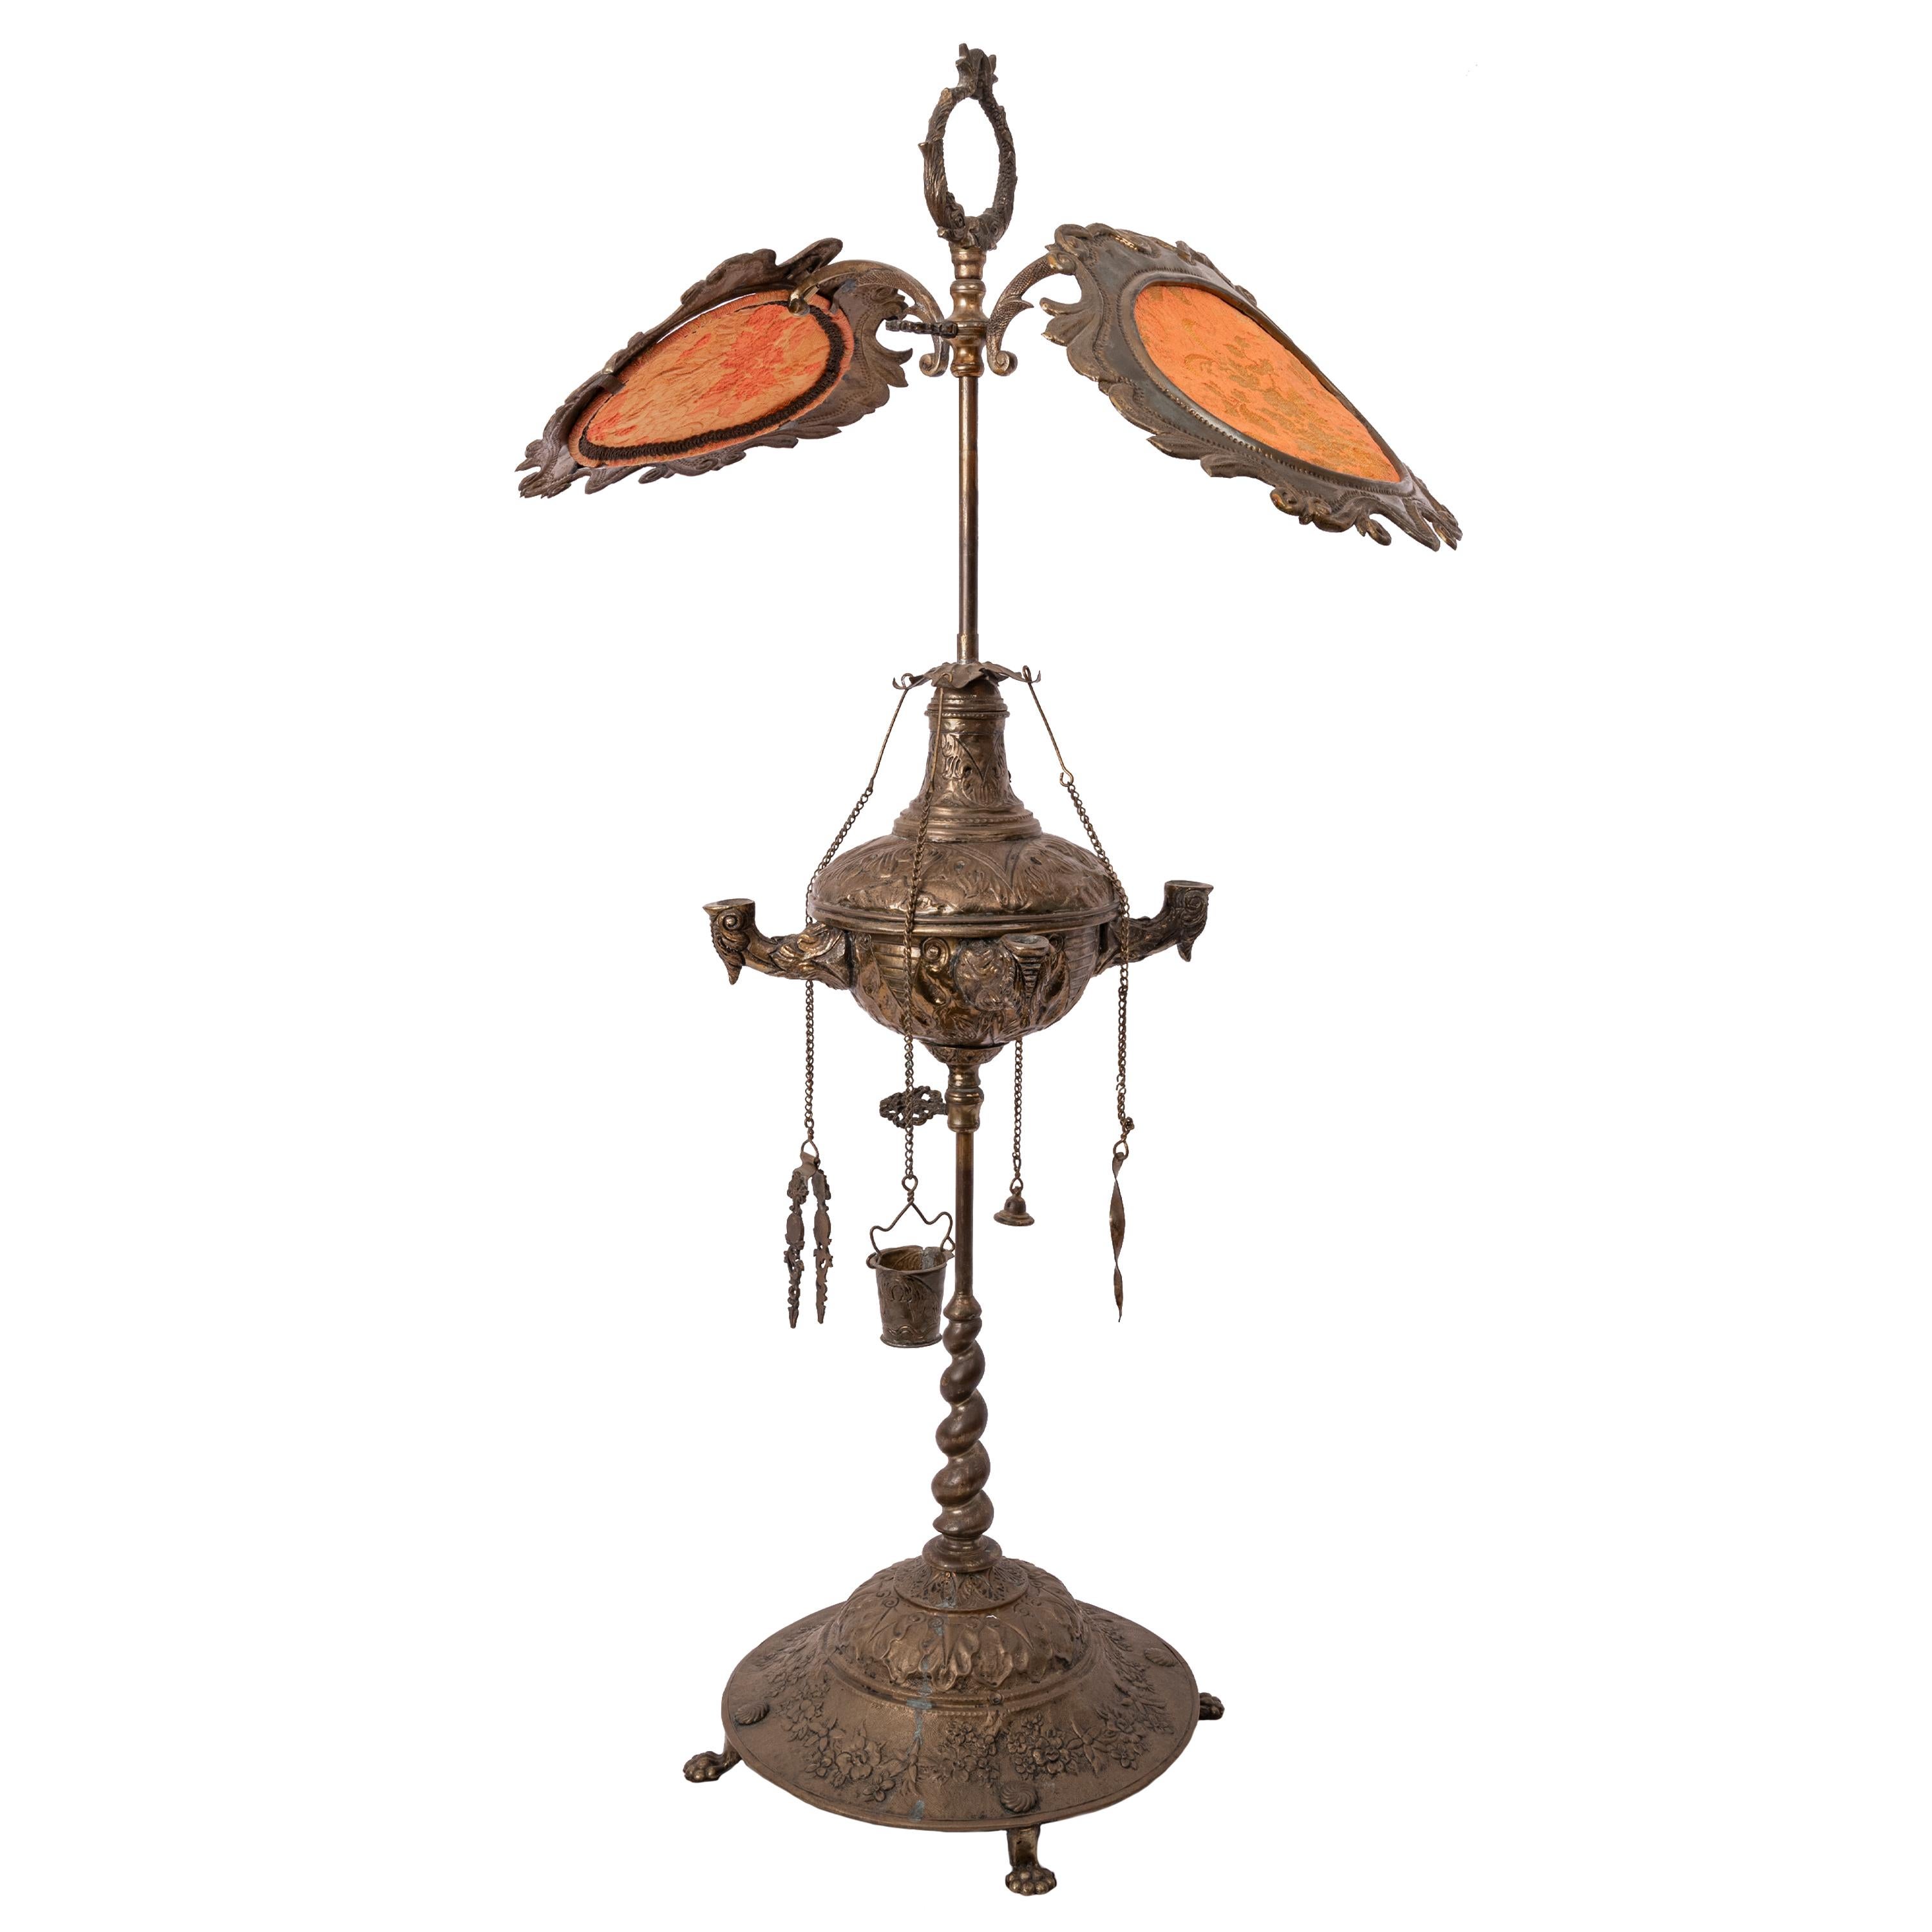 A good 19th century Italian 'Florentine' or 'Lucerne' 4 burner brass oil lamp, in the Renaissance Revival manner, circa 1860.
Designed to burn whale oil which is placed into a reservoir with a lift up cover that would have four wicks, one to each